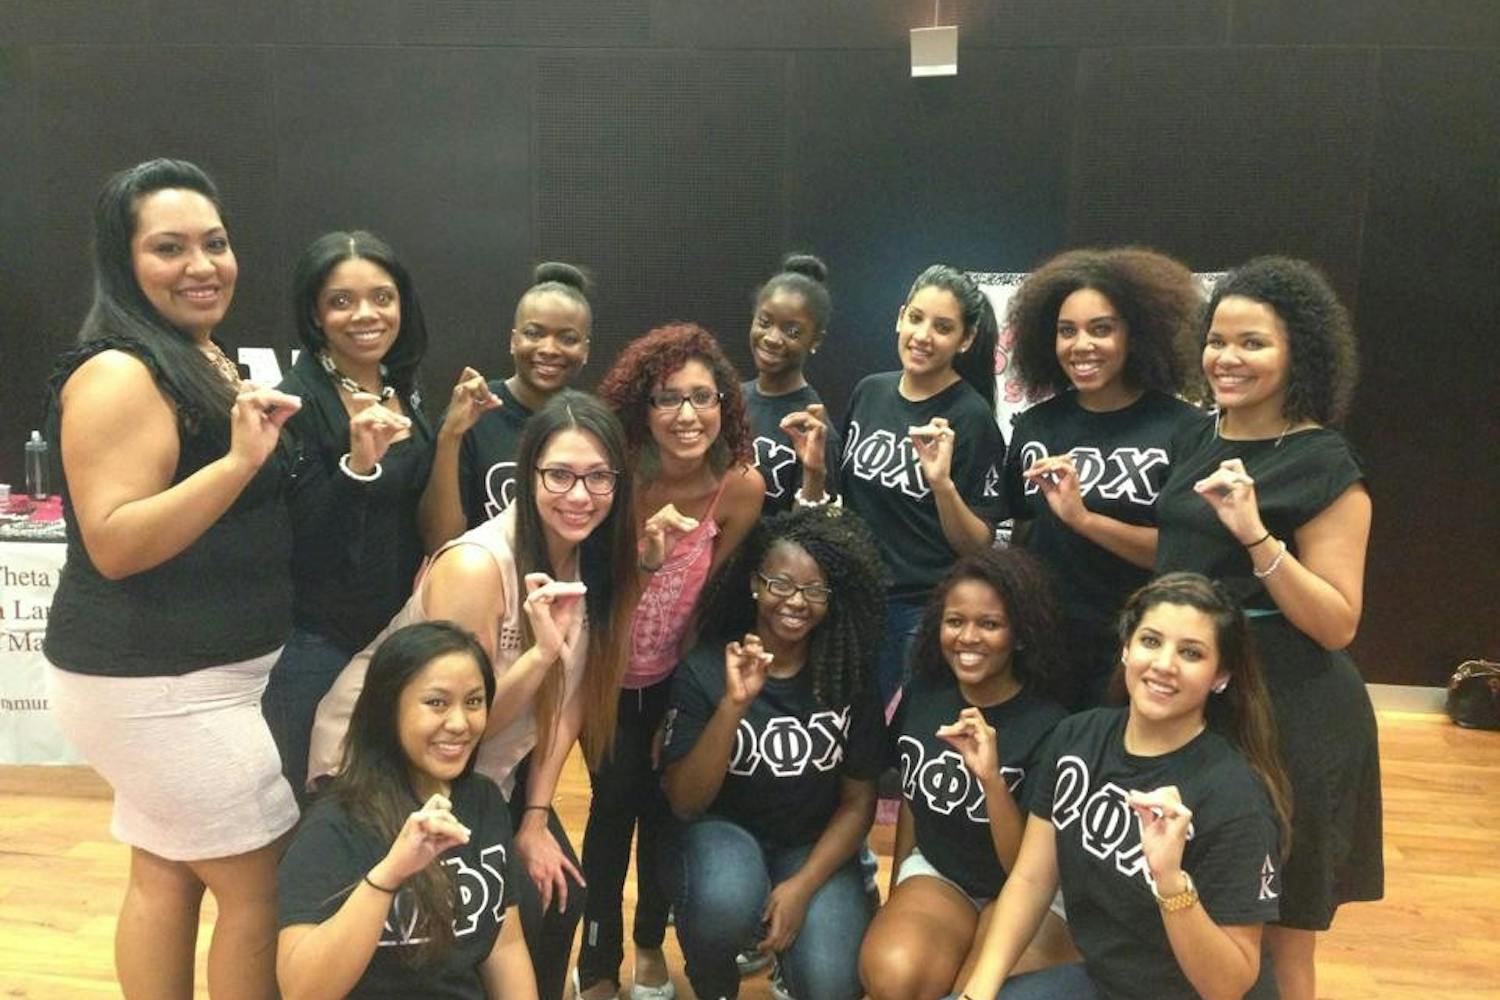 Members of&nbsp;Omega Phi Chi at the&nbsp;Multicultural Open House on Aug. 29, 2013.&nbsp;